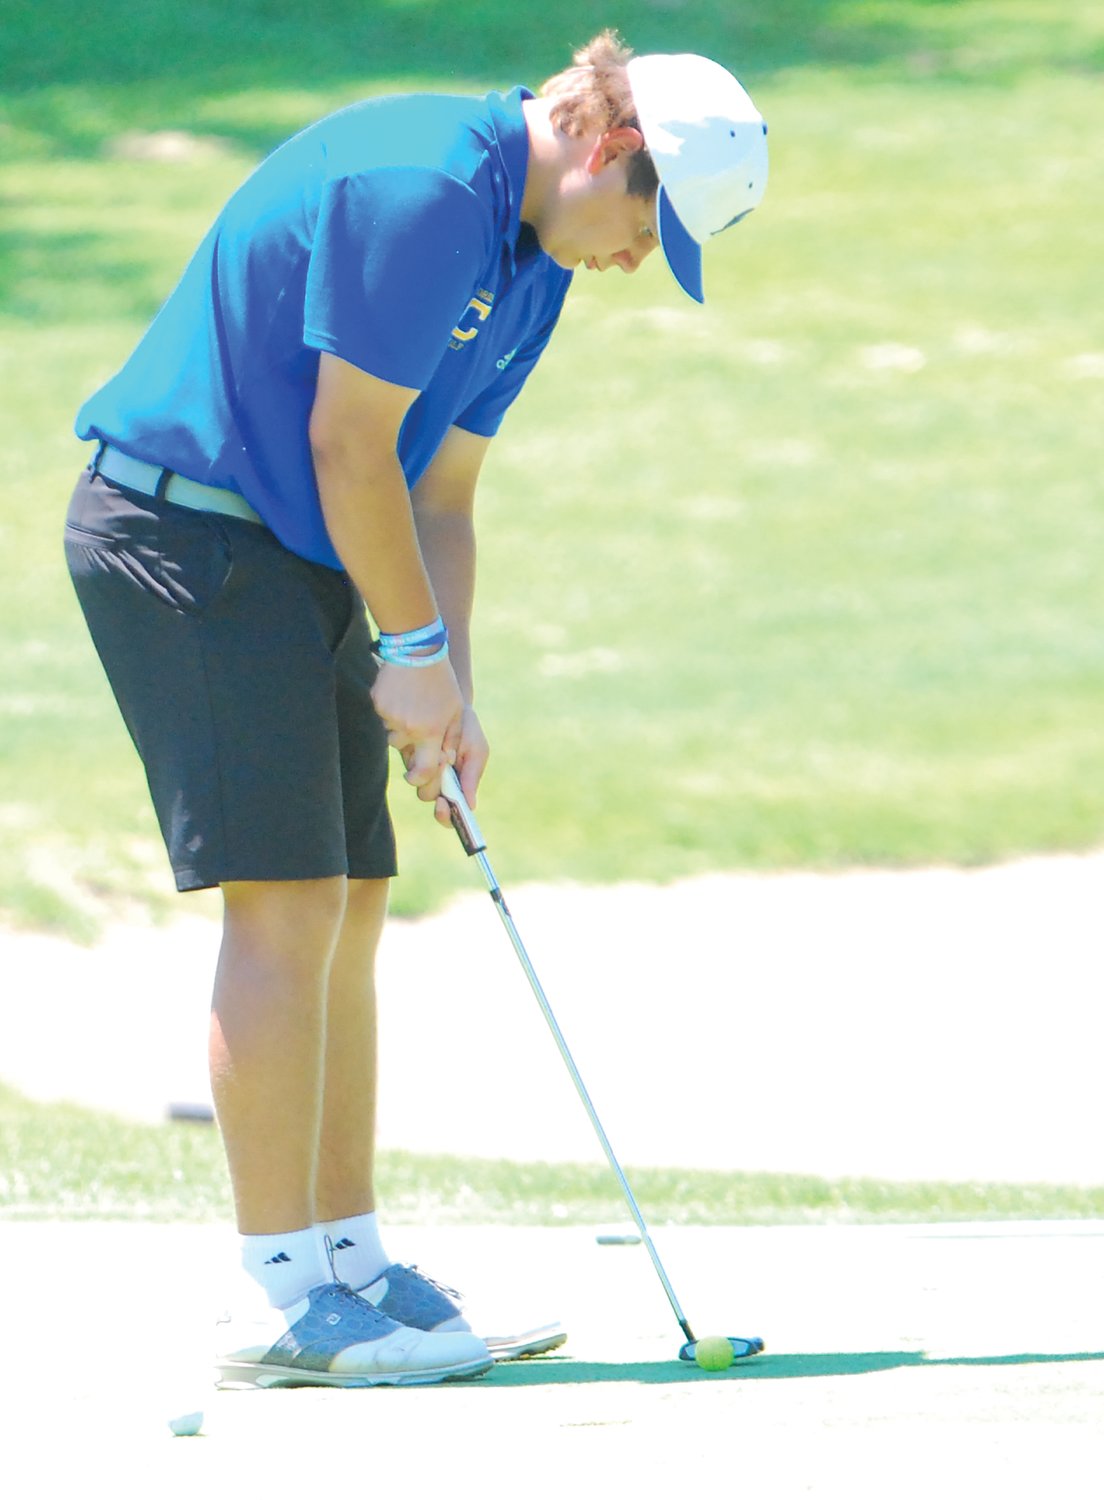 Crawfordsville's Luke Ranard fired an 81 at the sectional to advance to the regional as an individual.